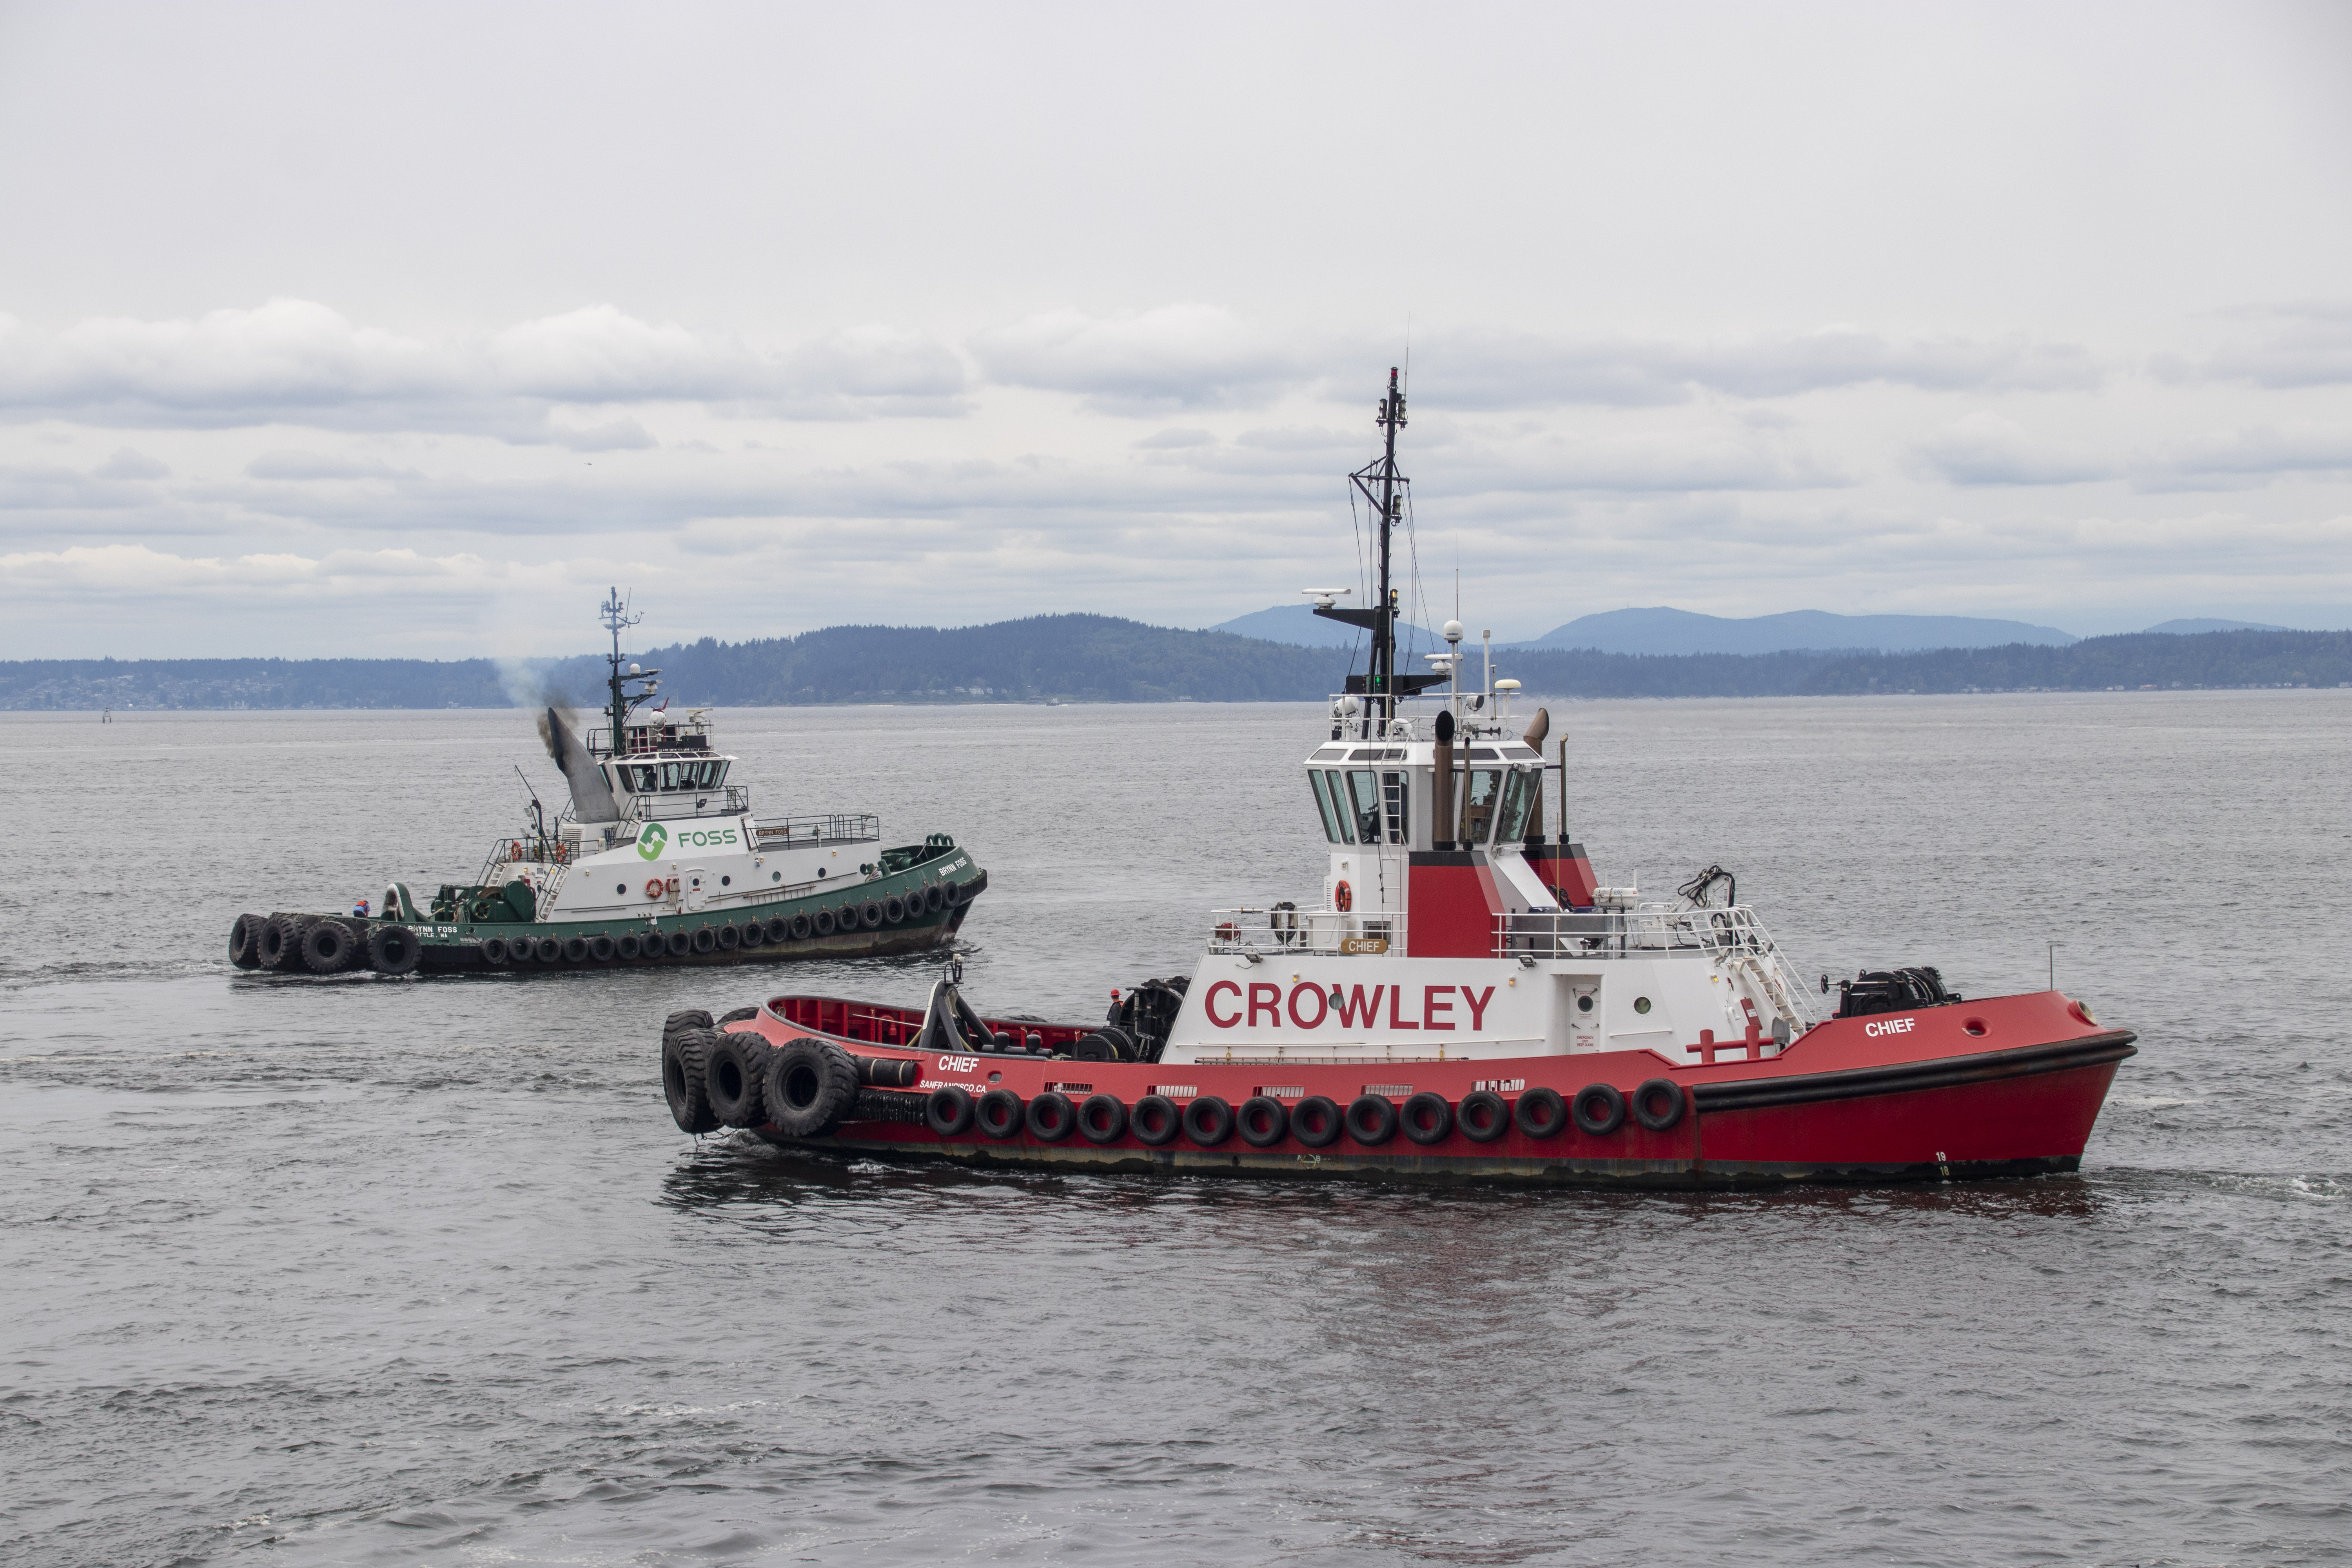 Crowley Chief and Foss donated tugs. Photo Credit- Sophie Scopazzi